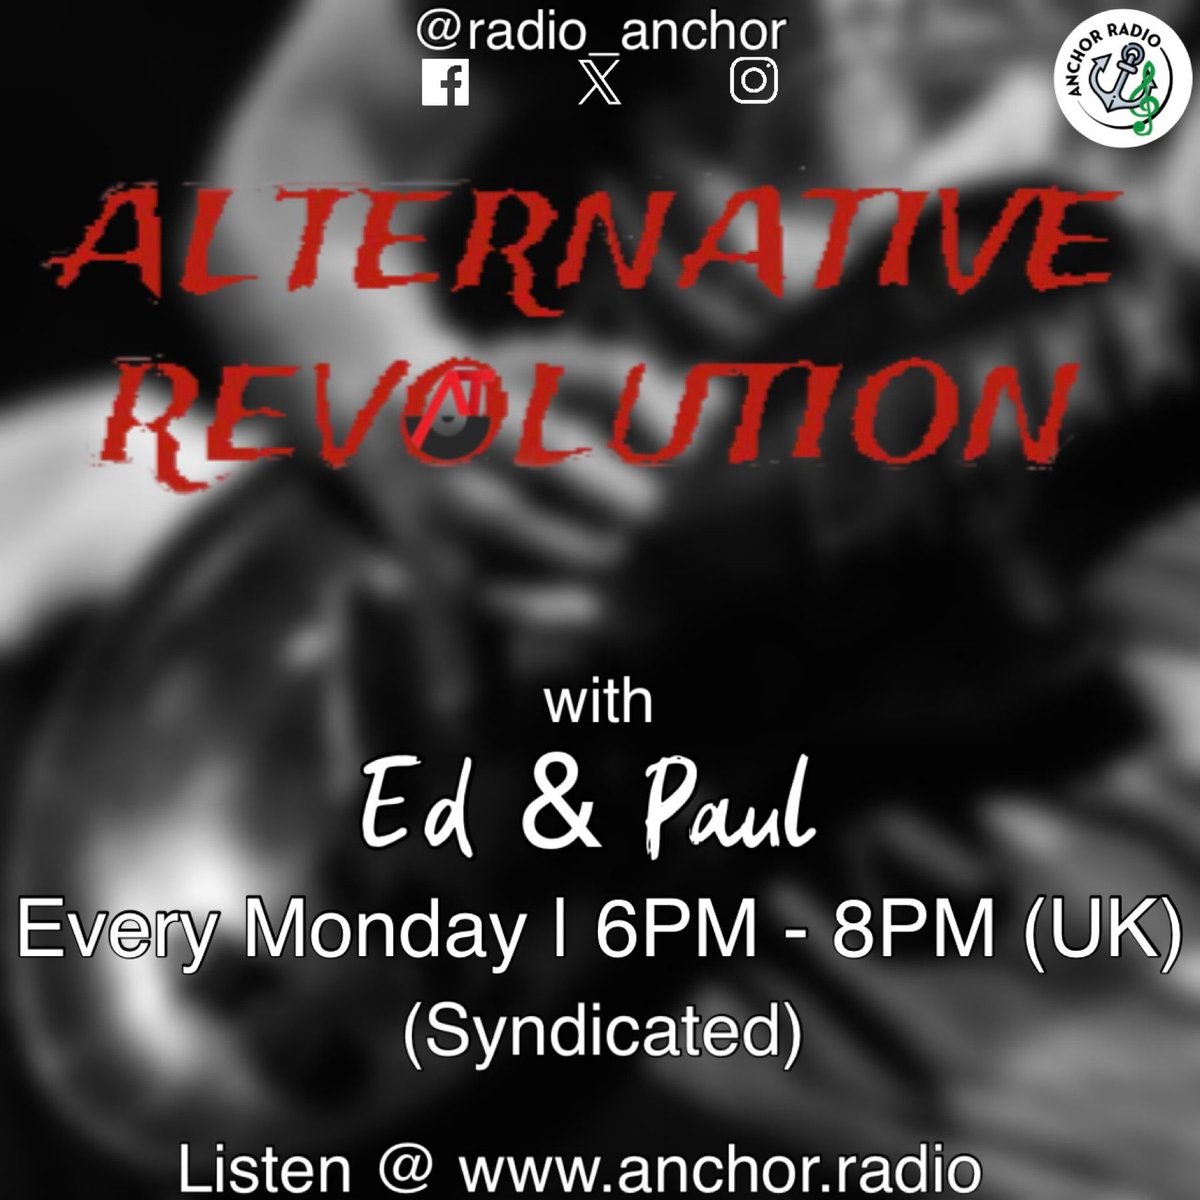 Alternative Revolution is live at 6pm tonight on anchor.radio. Sadly no Ed this week, but still plenty of top new releases, from the likes of @thepleasured0me,@SanQuentinUK, @CatsOfTrans @SCATTEREDASHES1, @IssySutcliffex,@TheBlissUk @destrendsband,@BibiClubmusic & more